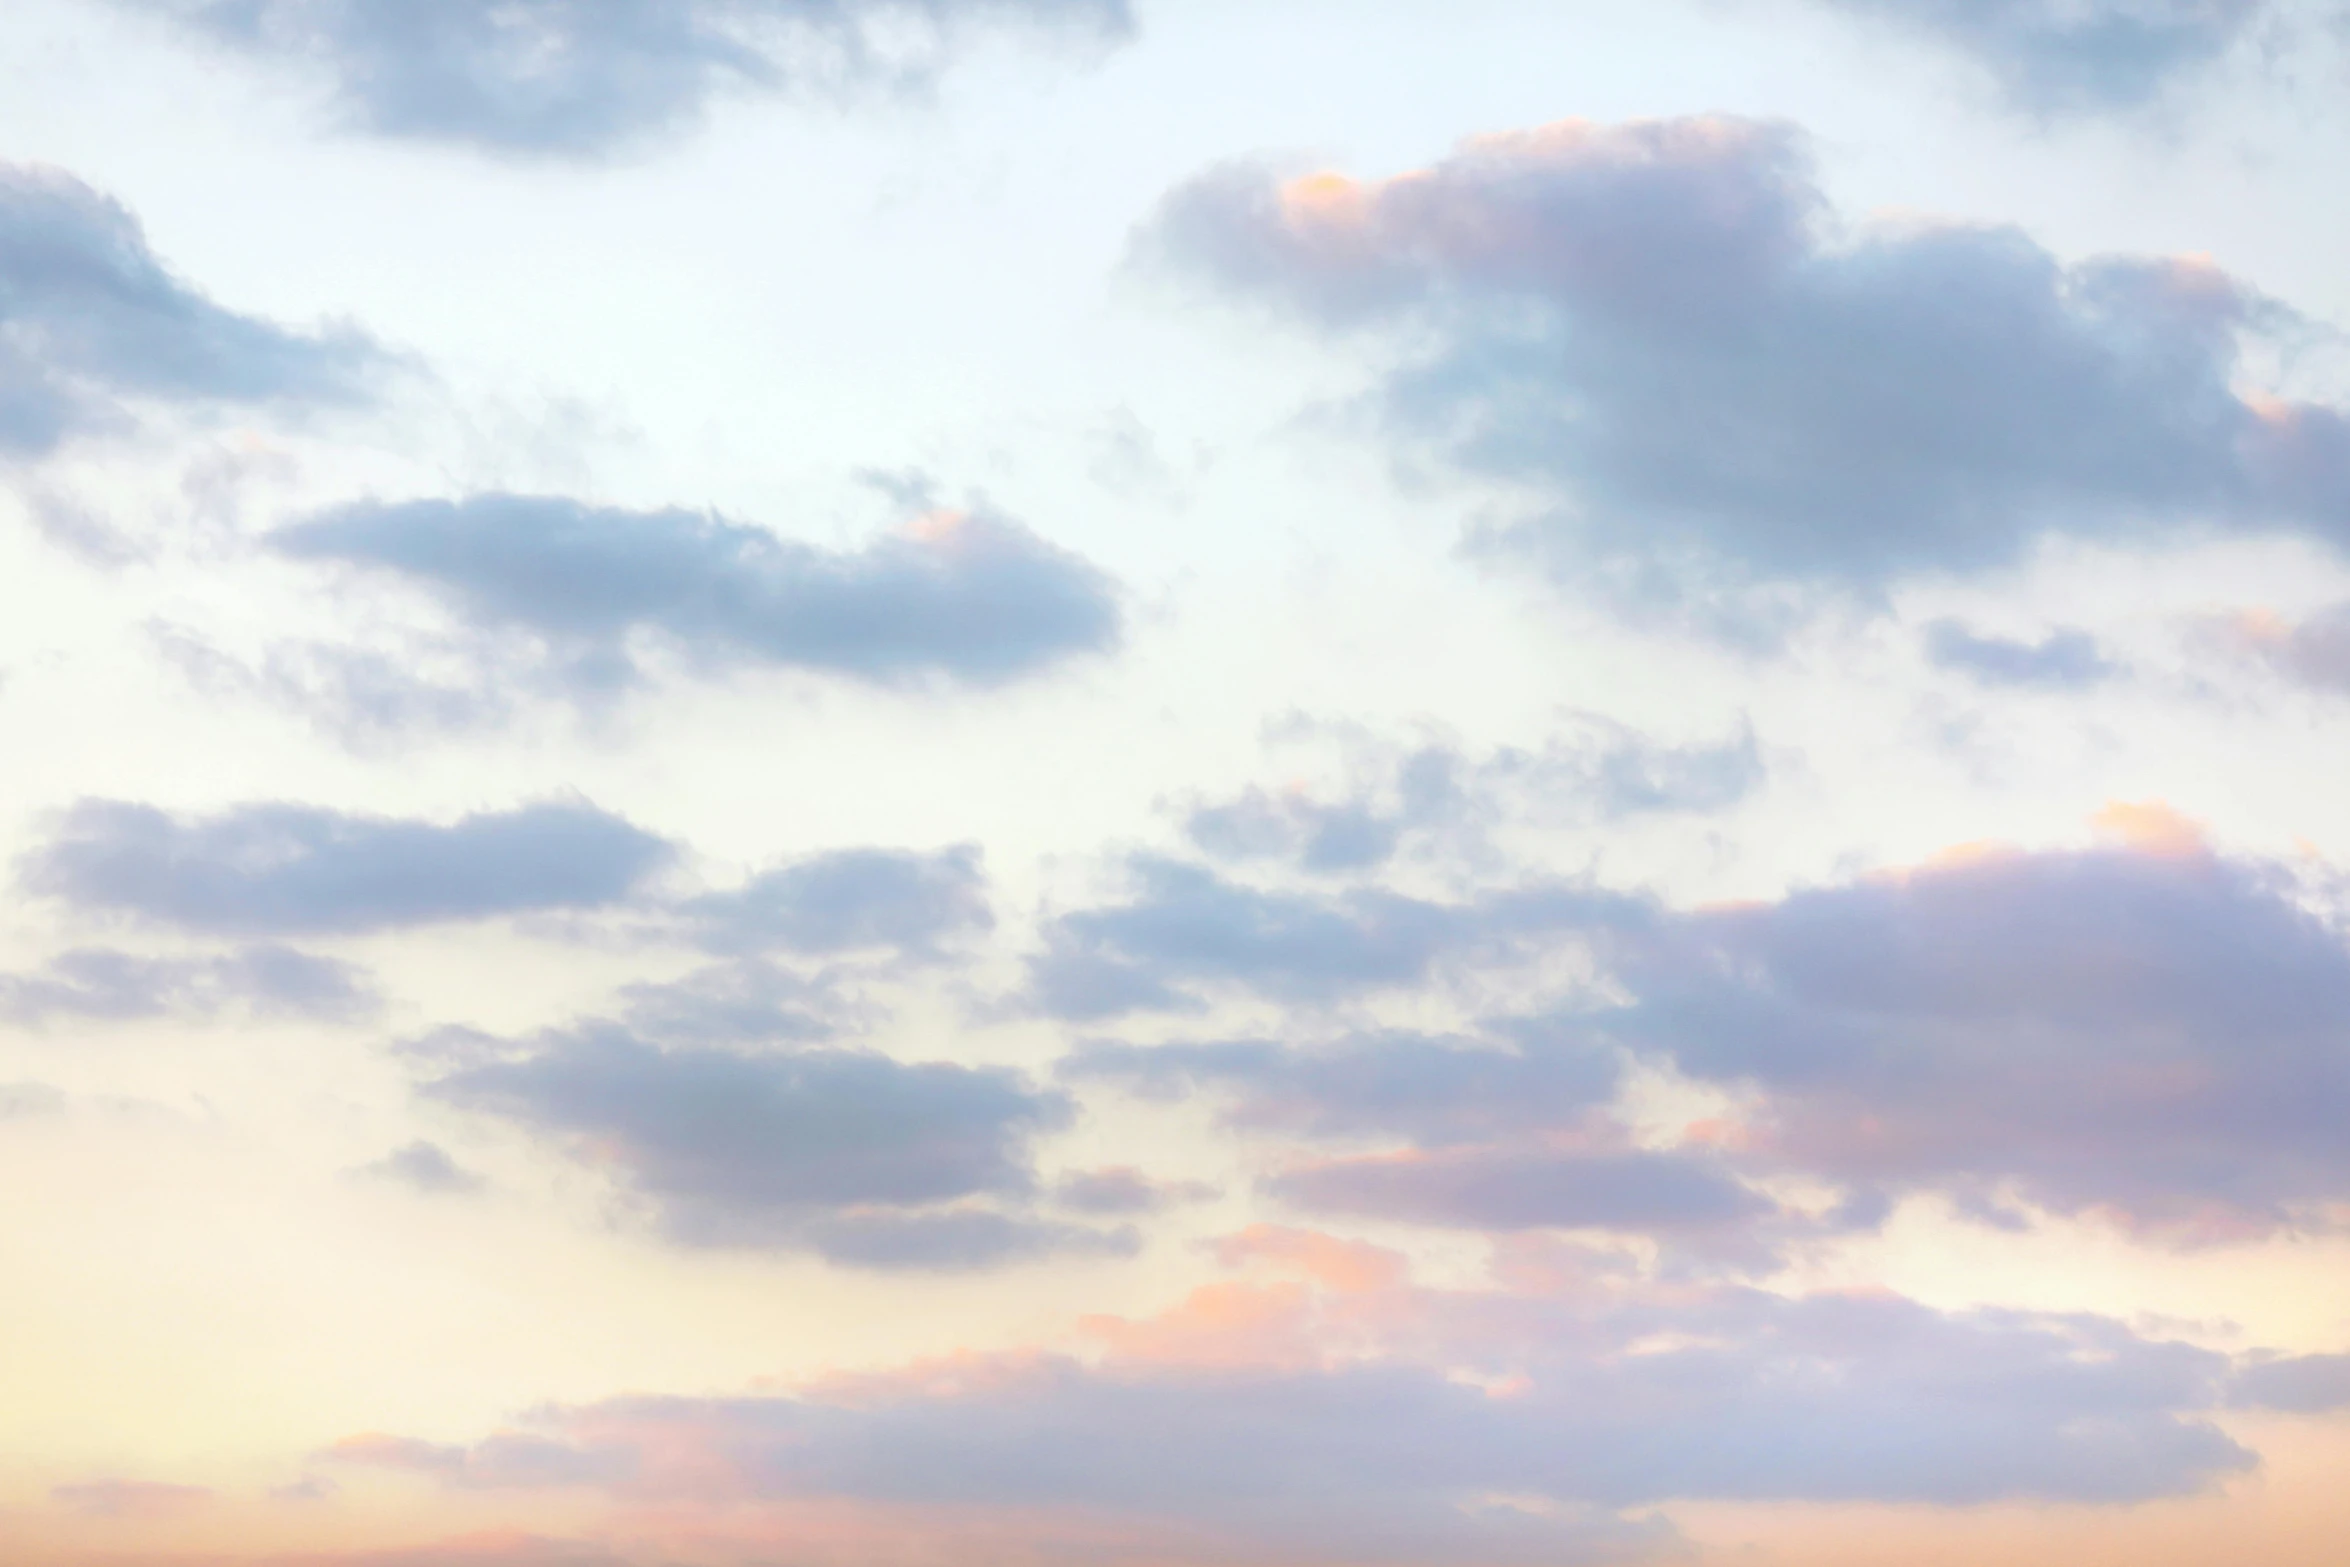 a herd of cattle standing on top of a lush green field, an album cover, unsplash, romanticism, pink clouds in the sky, layered stratocumulus clouds, sunset panorama, sky made of ceiling panels